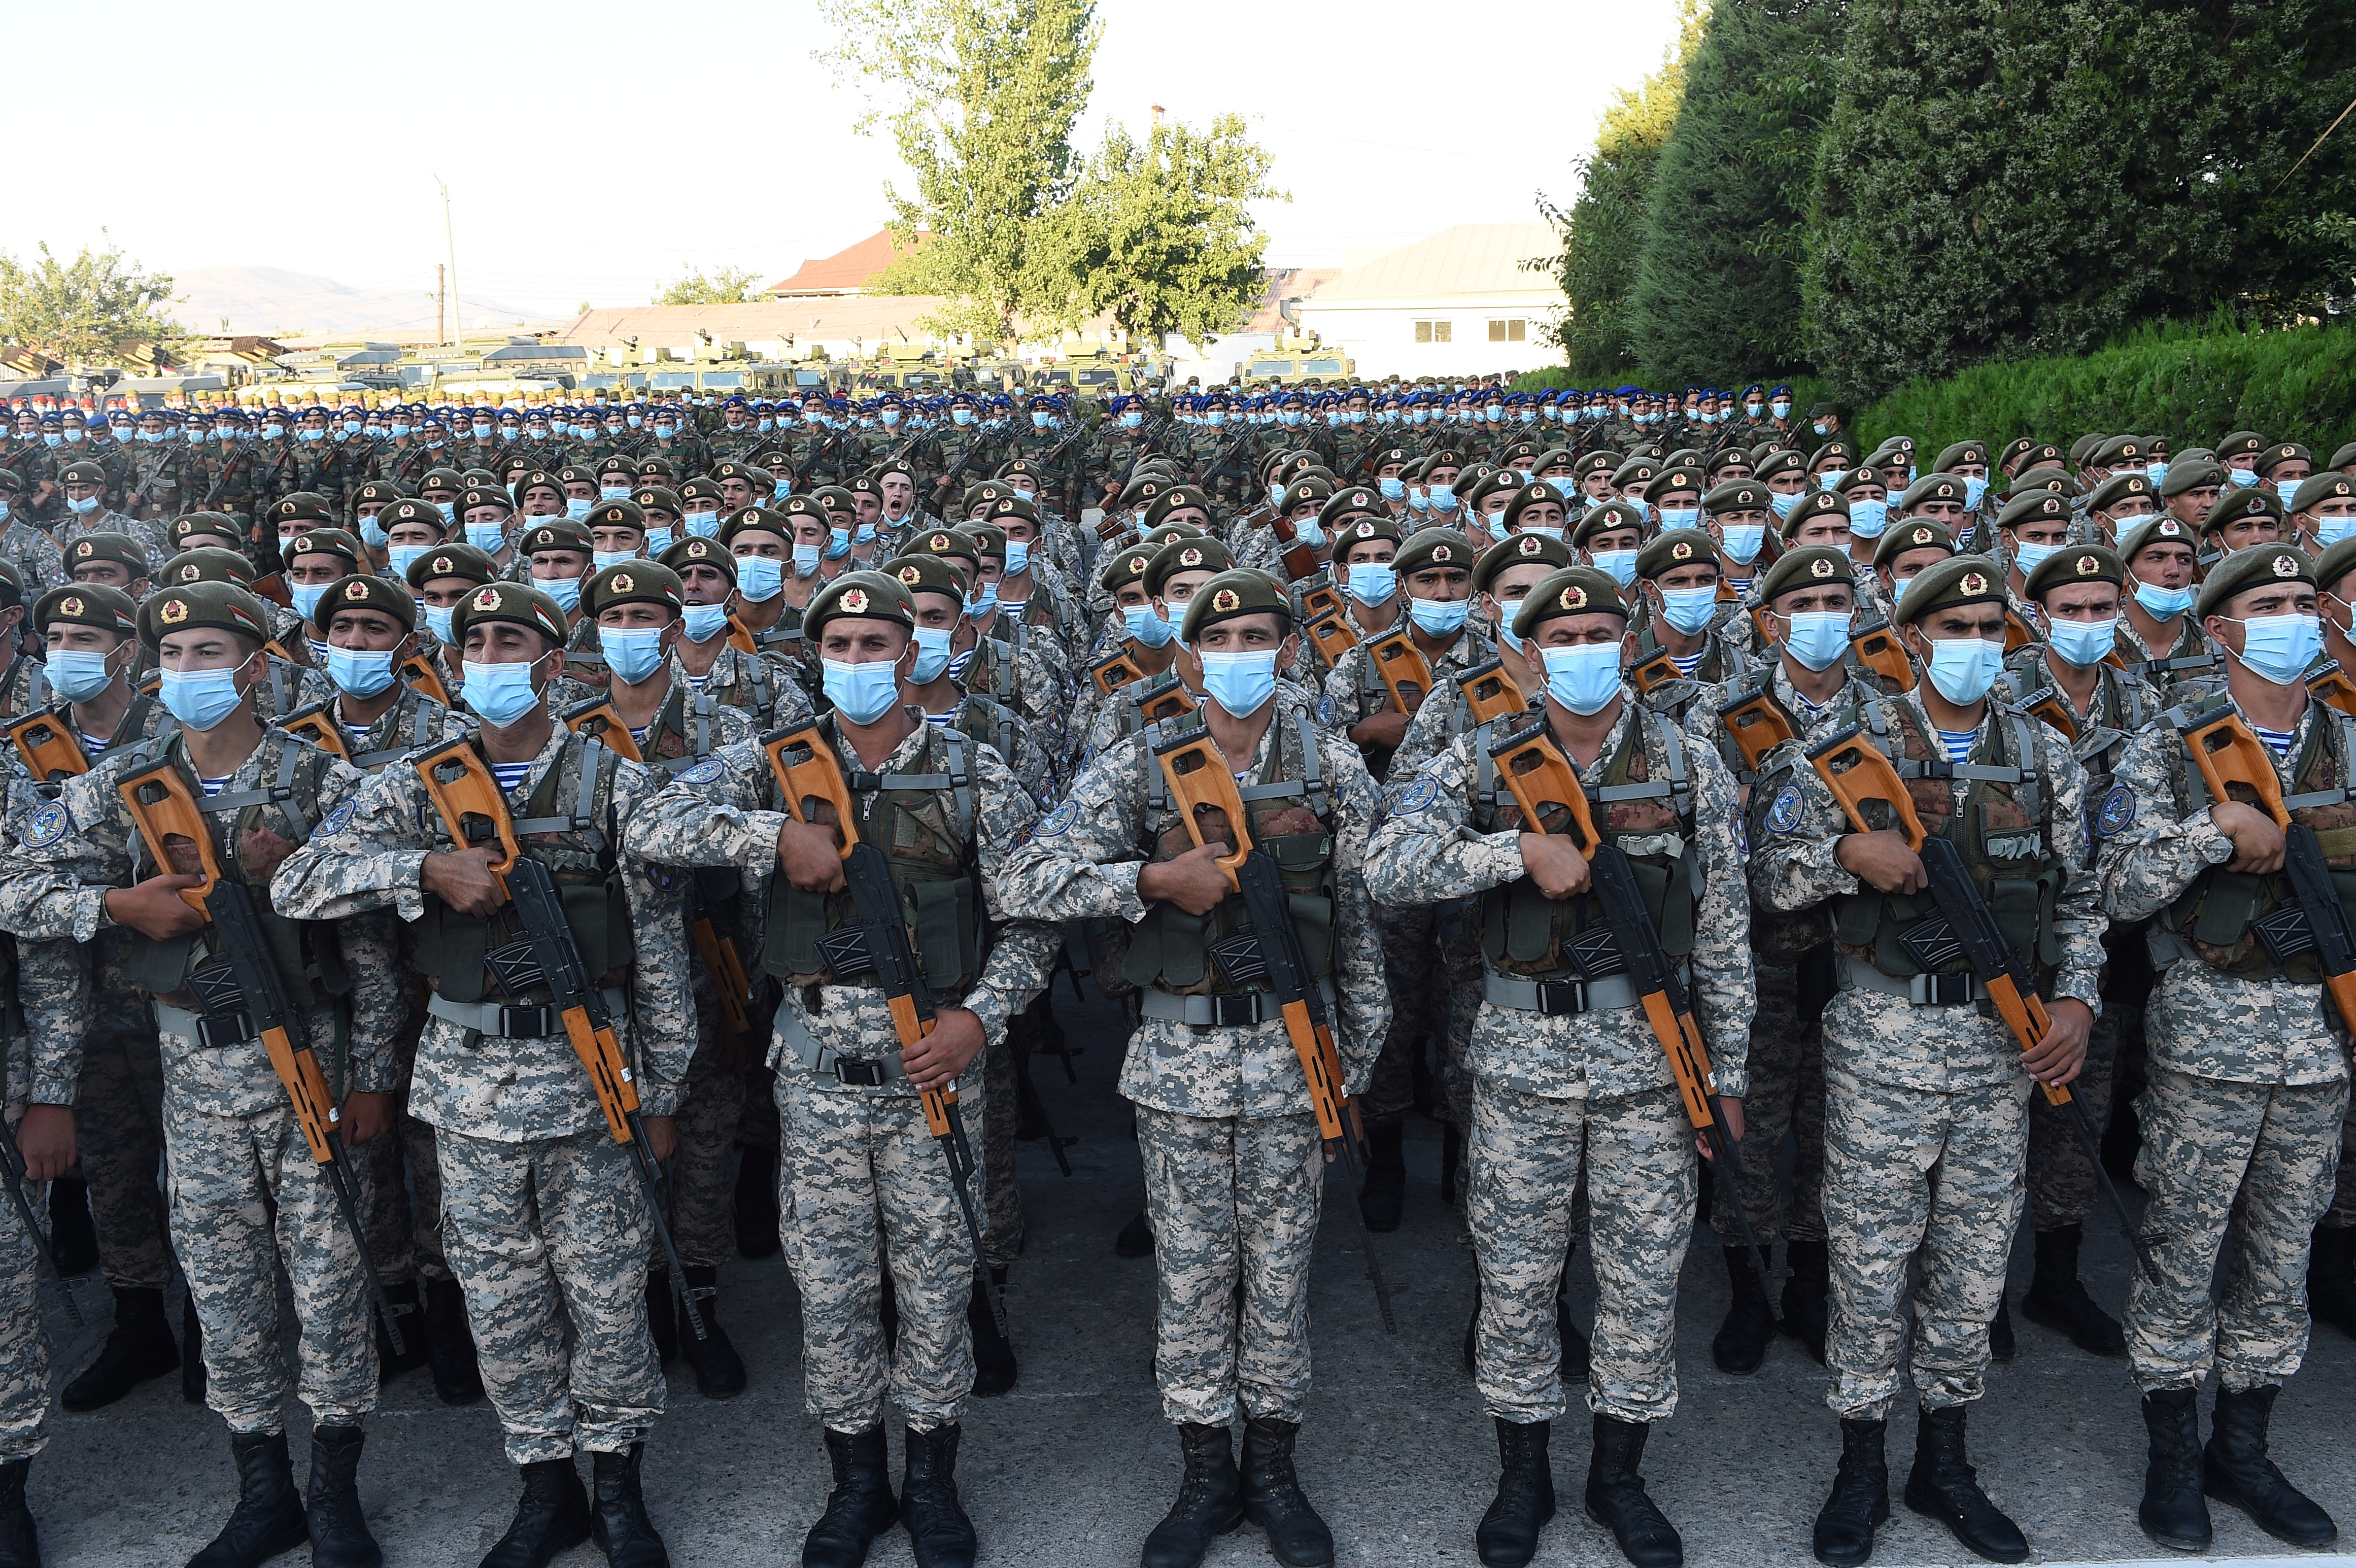 Tajik service members line up during a military parade in Dushanbe